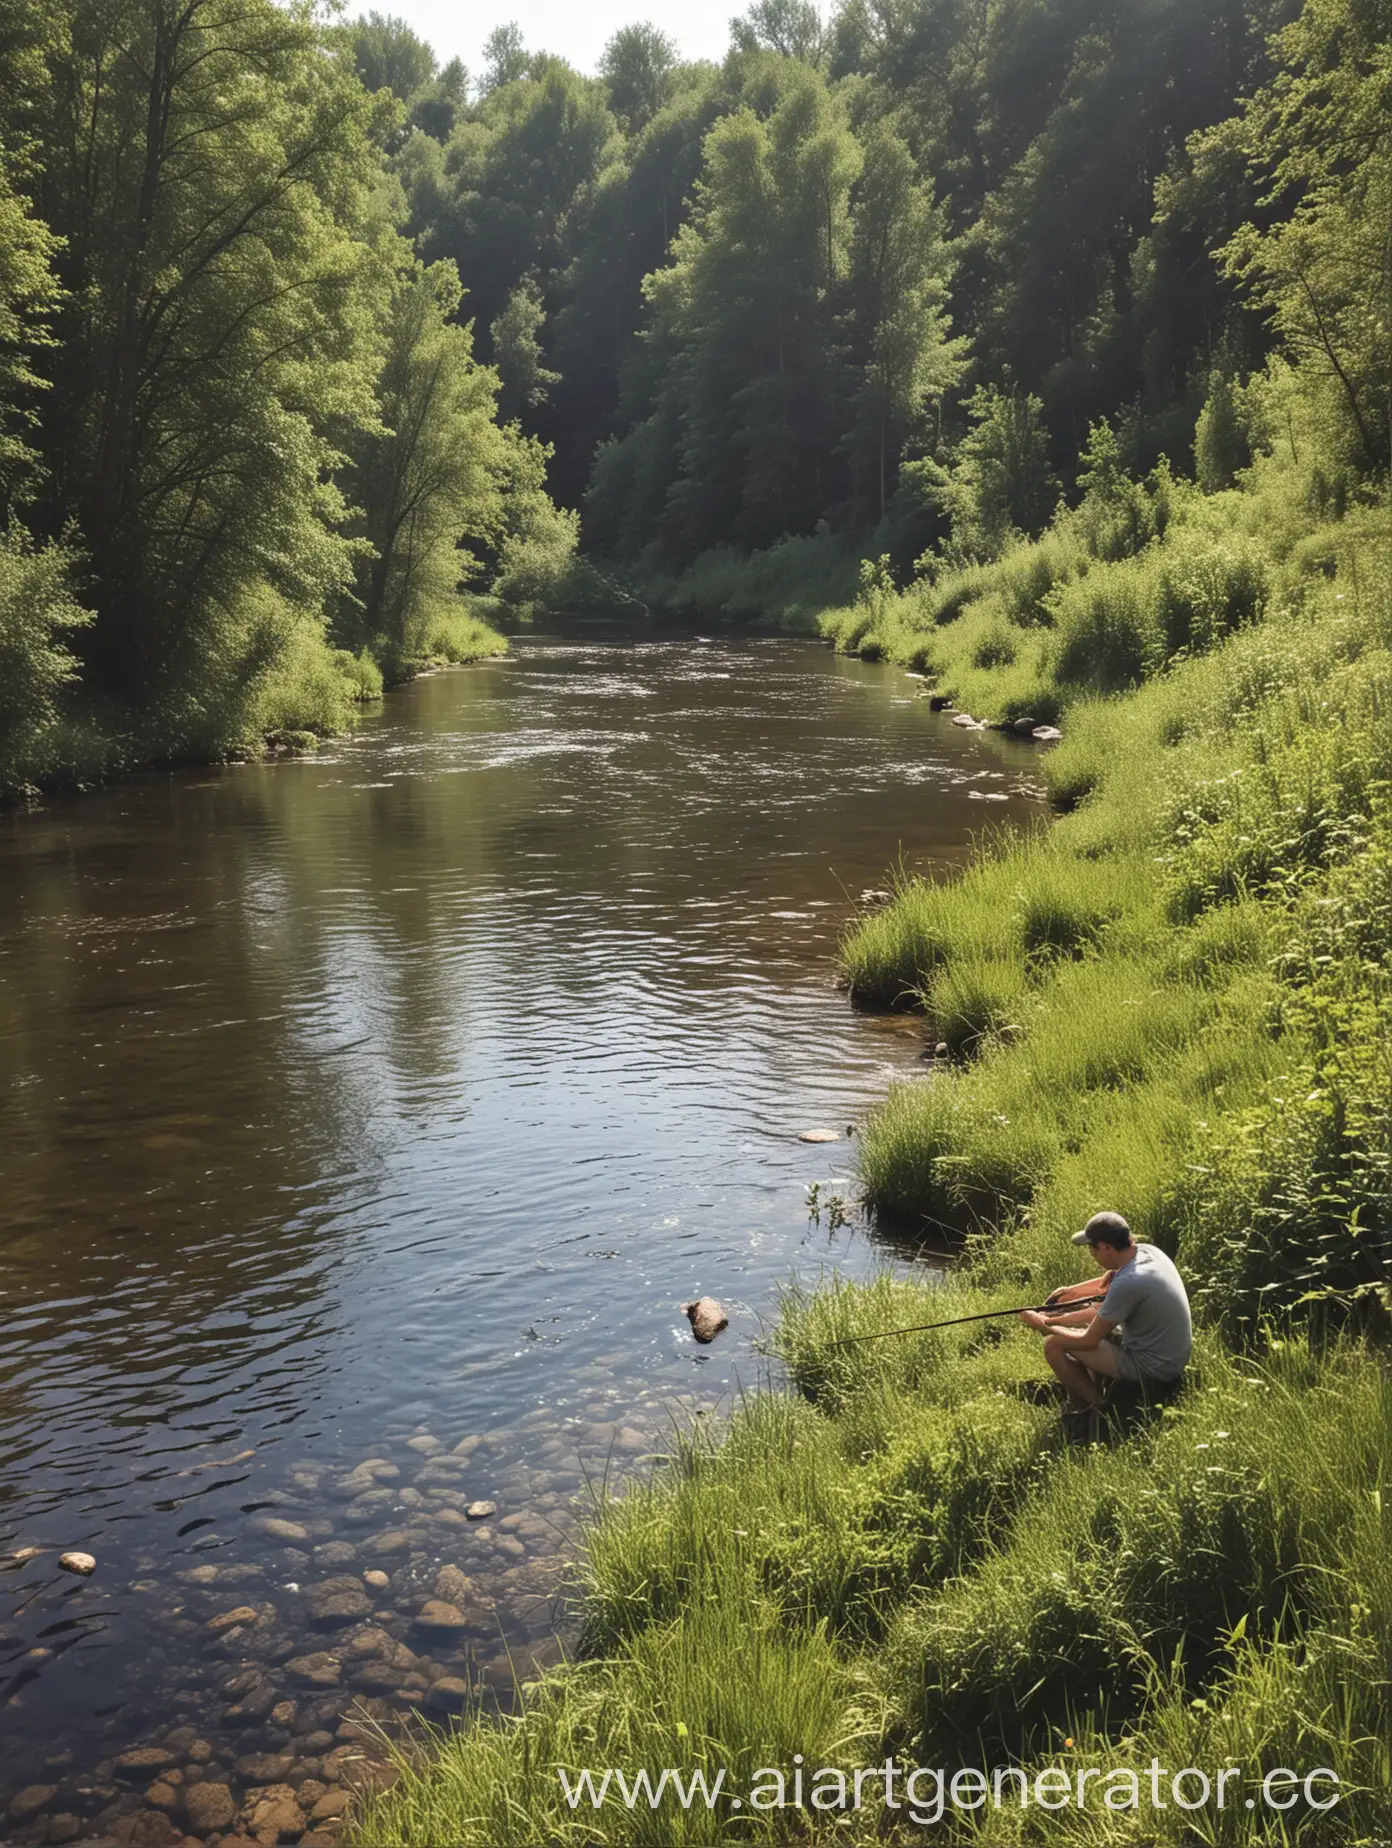 Summer-Fishing-by-the-Riverside-Tranquil-Scene-of-Anglers-Enjoying-River-Fishing